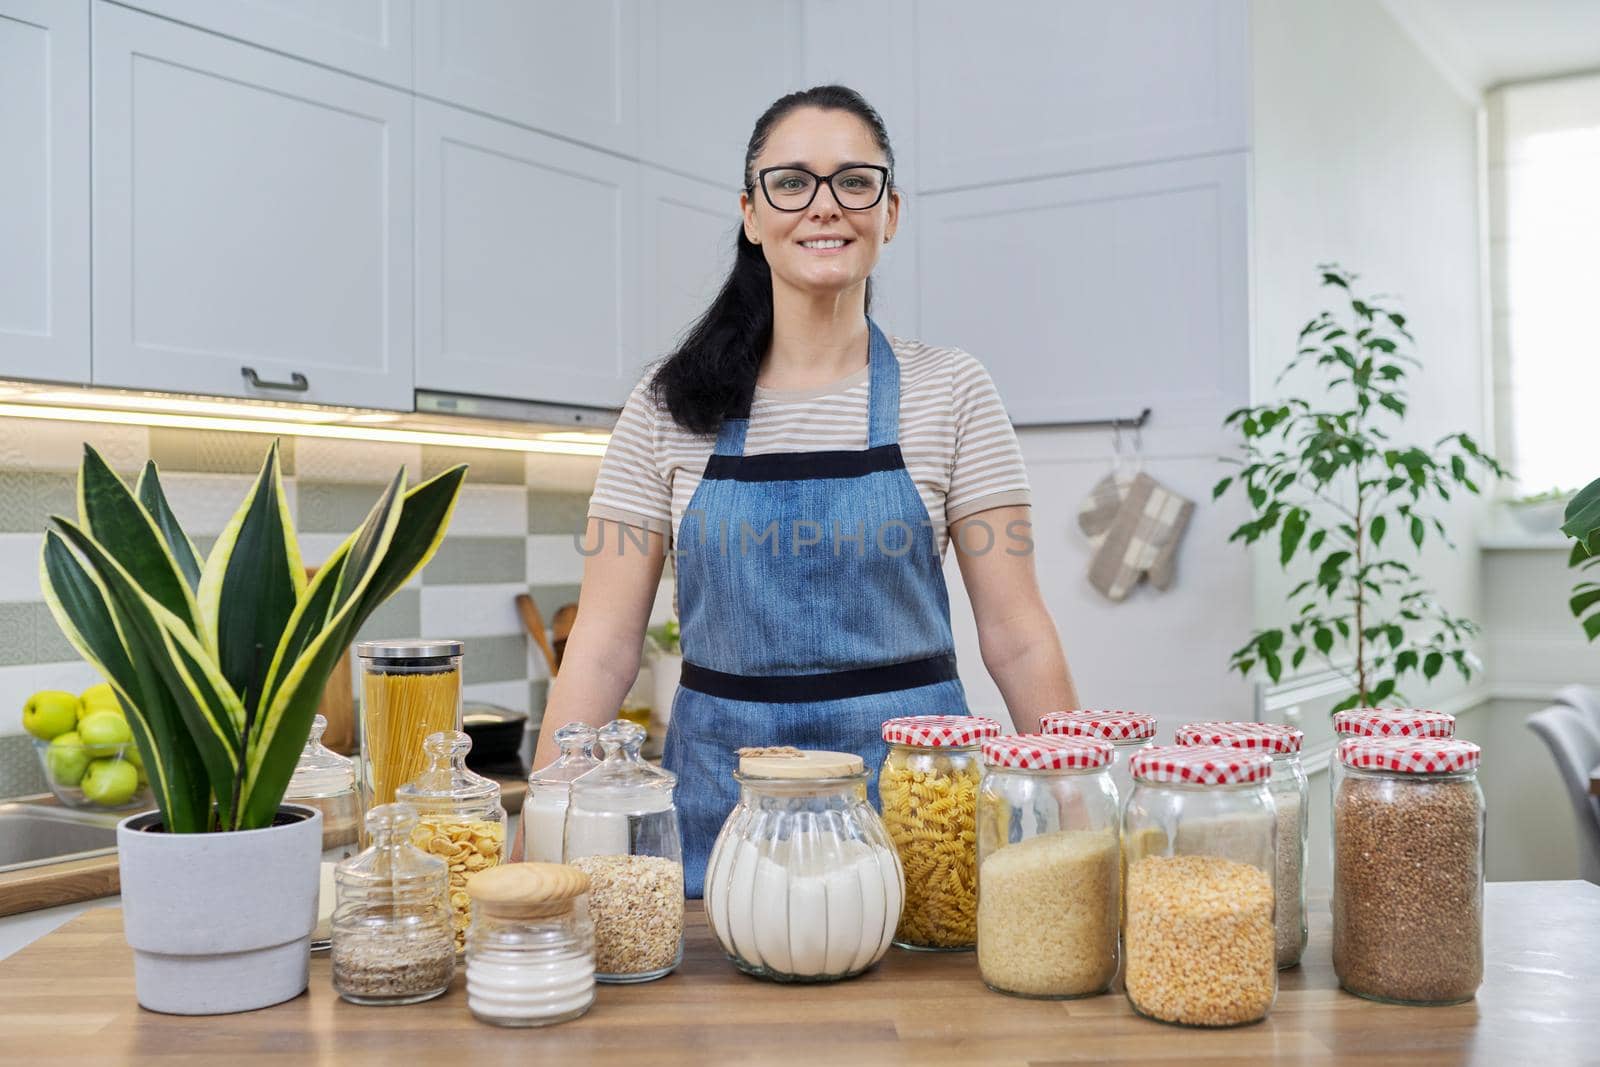 Portrait of smiling woman housewife in an apron in kitchen. Jars of cereals on the table, organizing and storing food